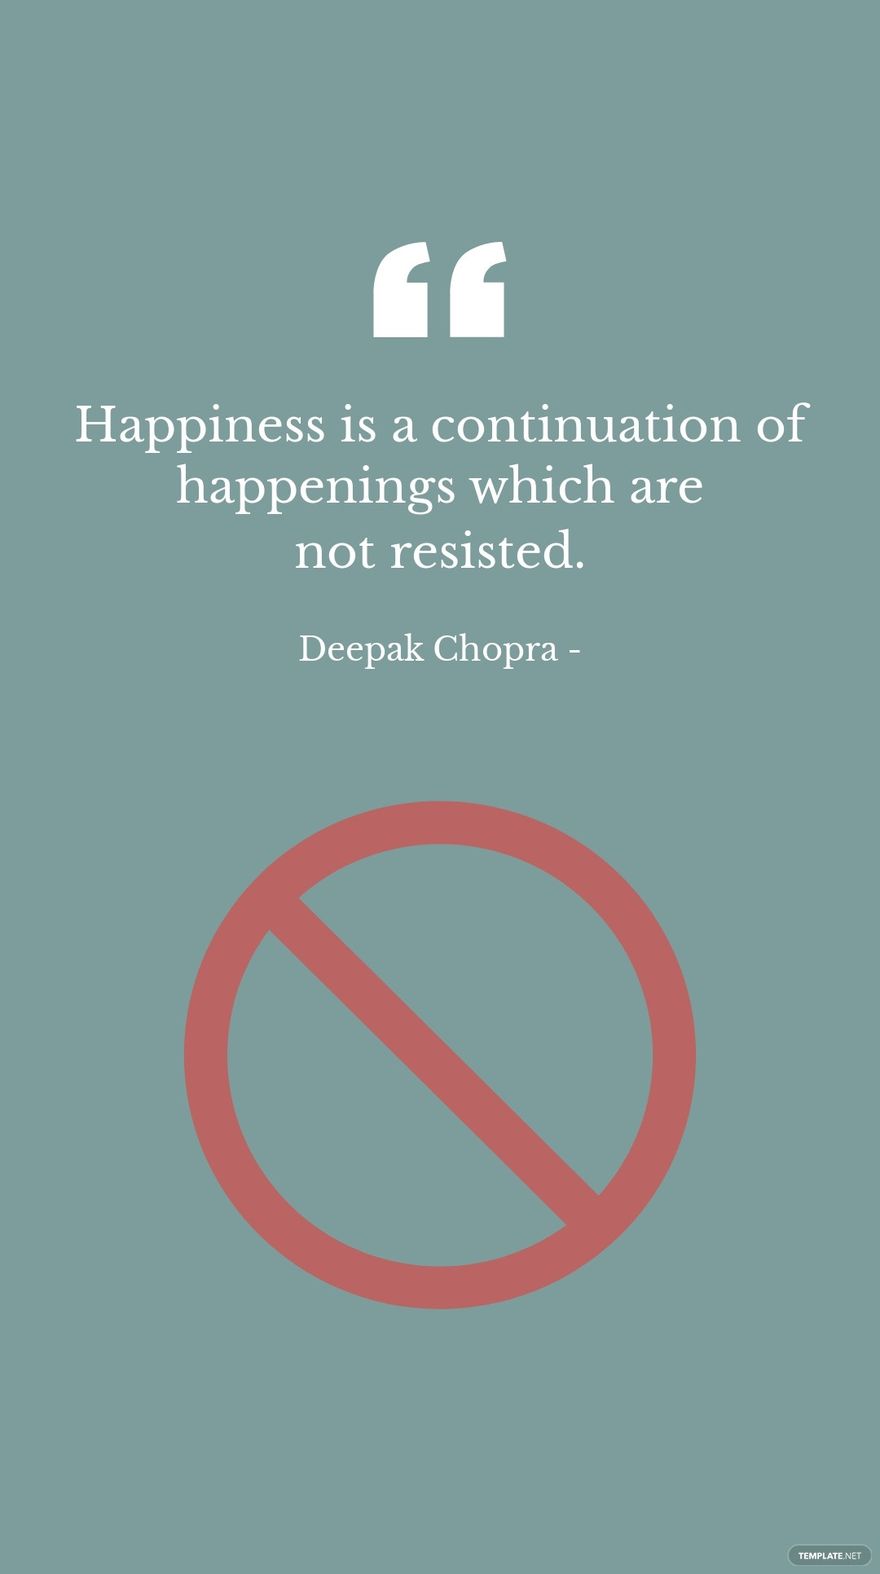 Free Deepak Chopra - Happiness is a continuation of happenings which are not resisted. in JPG